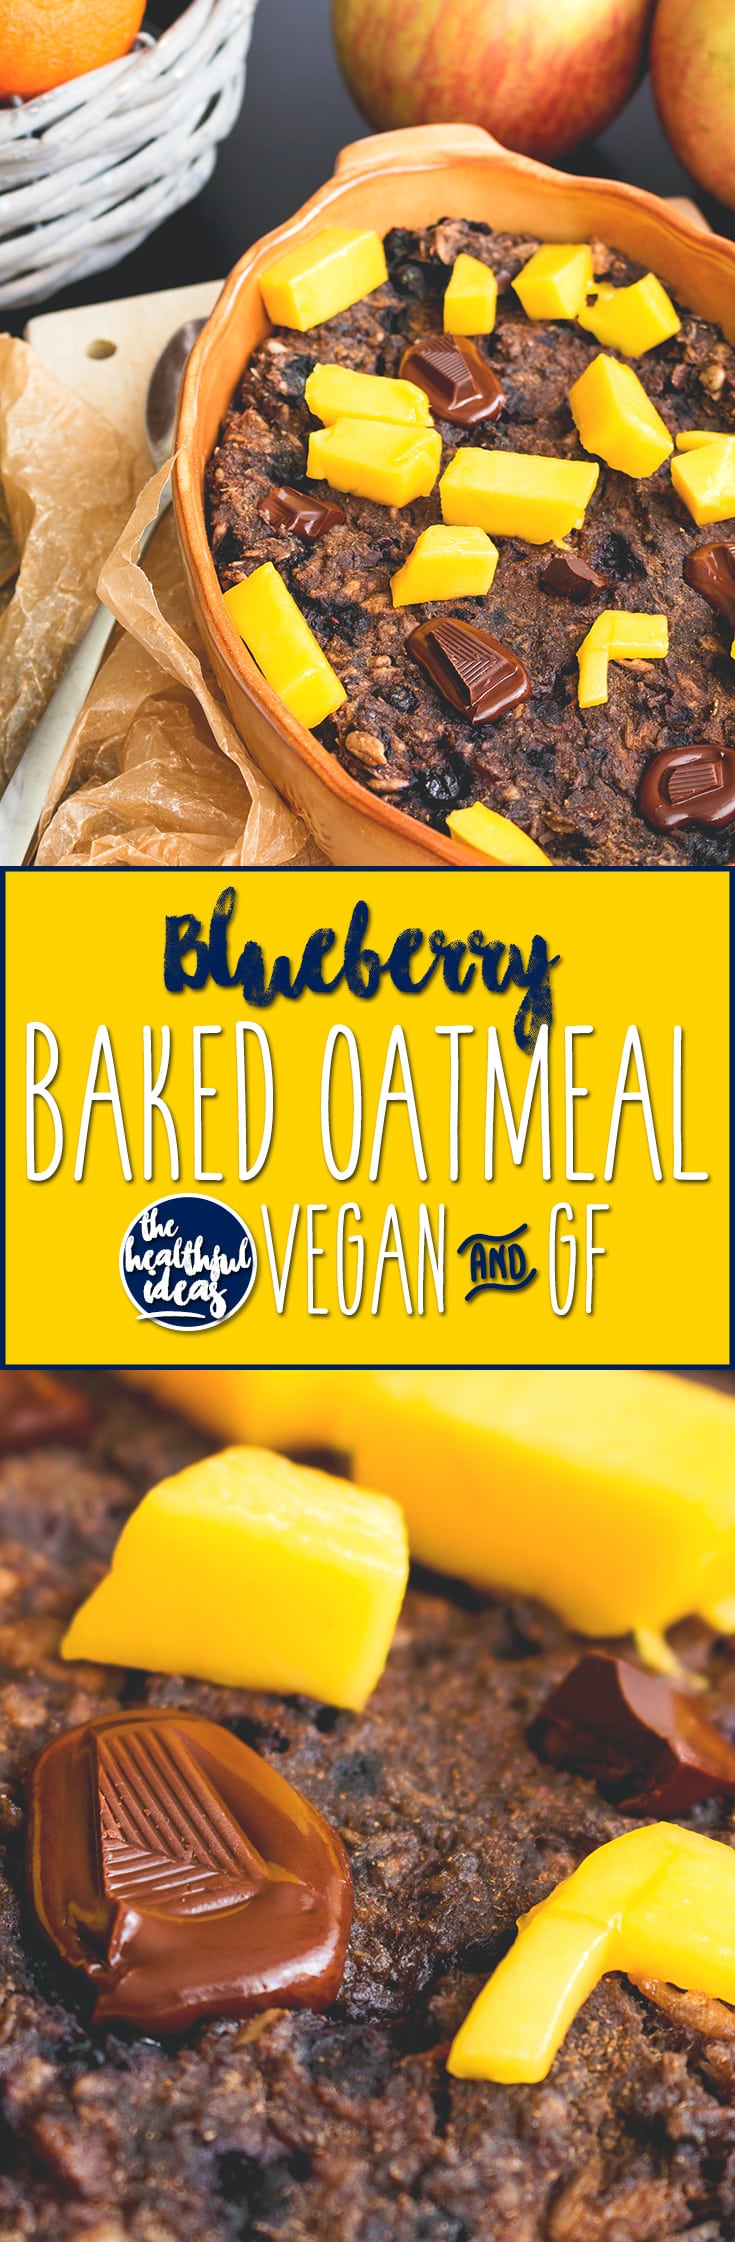 Blueberry Baked Oatmeal - delicious comforting breakfast recipe that happens to be good for you. I love baked oatmeal! Great topped with tropical fruits, chocolate, and nut butter. | thehealthfulideas.com